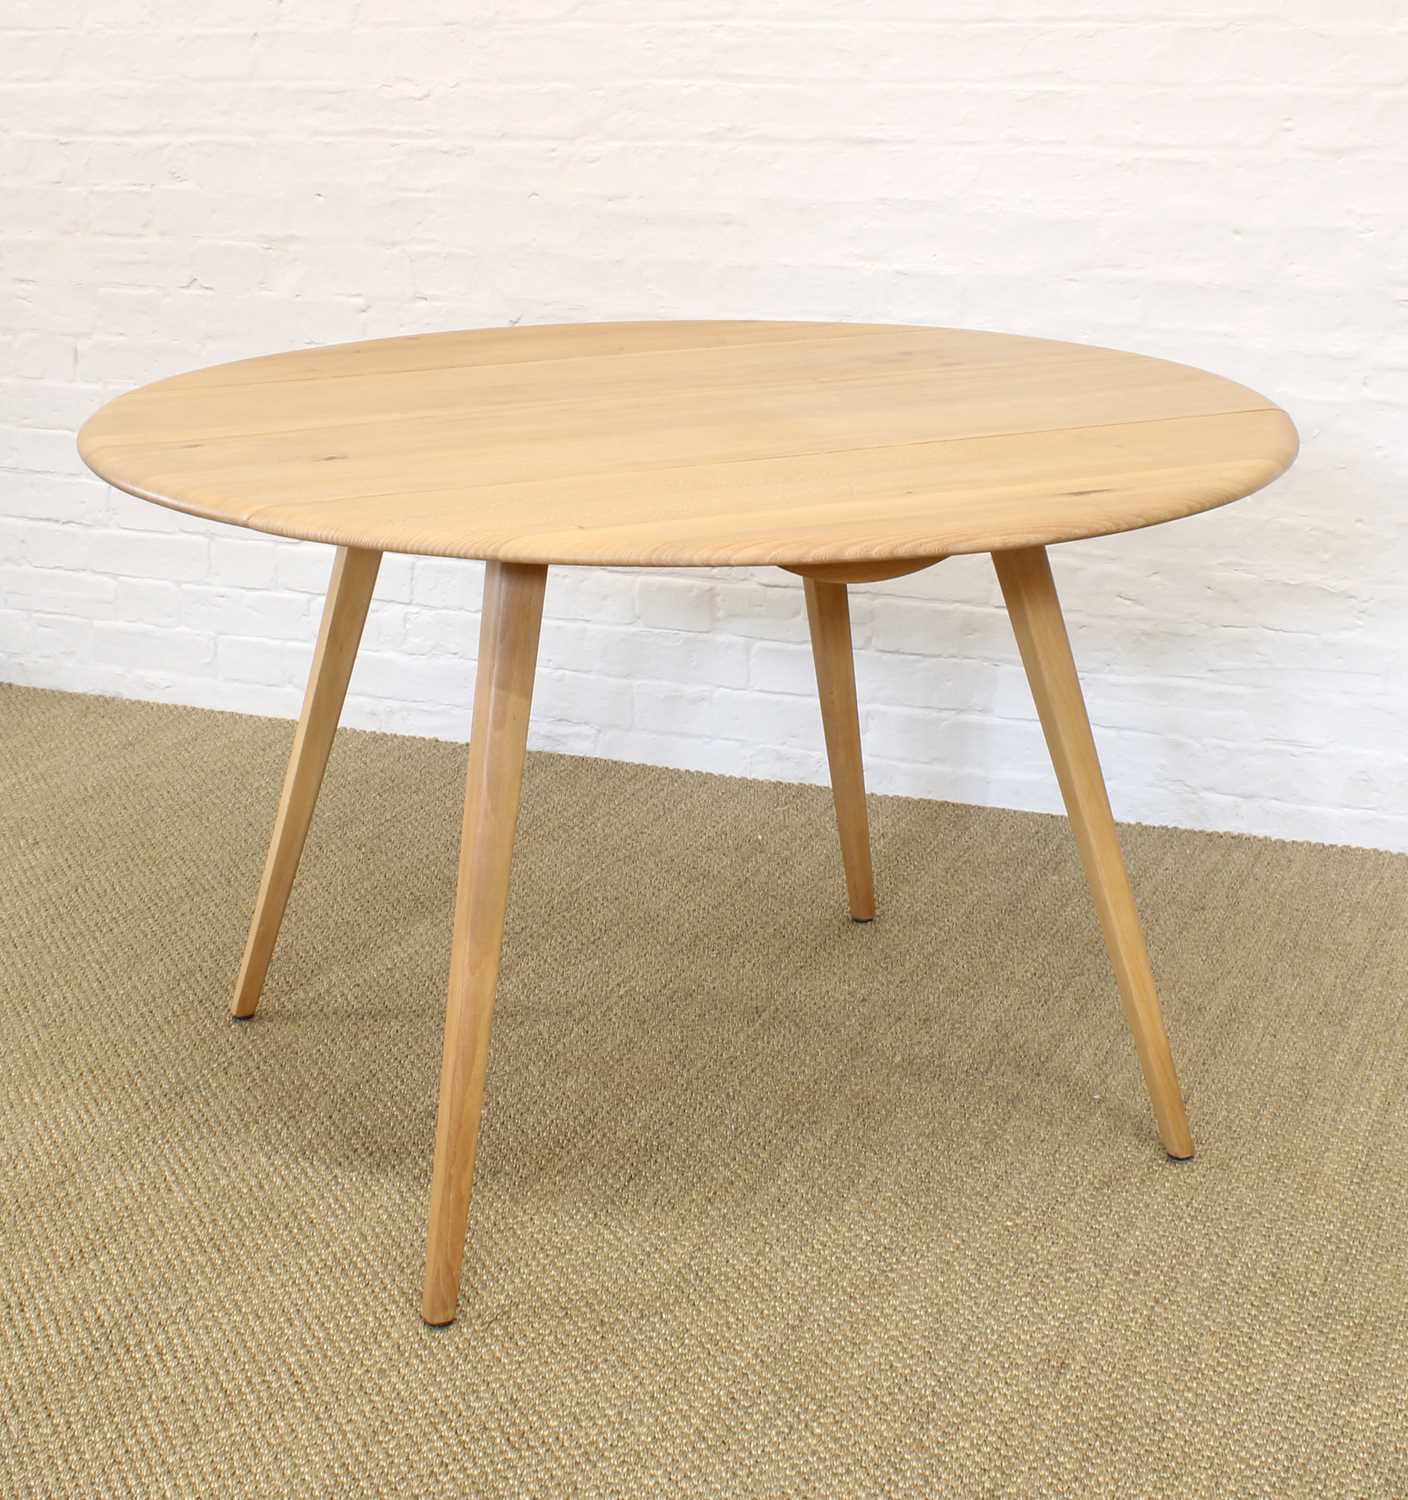 Lucian Ercolani for Ercol Model 384 "Windsor" Drop-Leaf Dining Table - Image 2 of 12